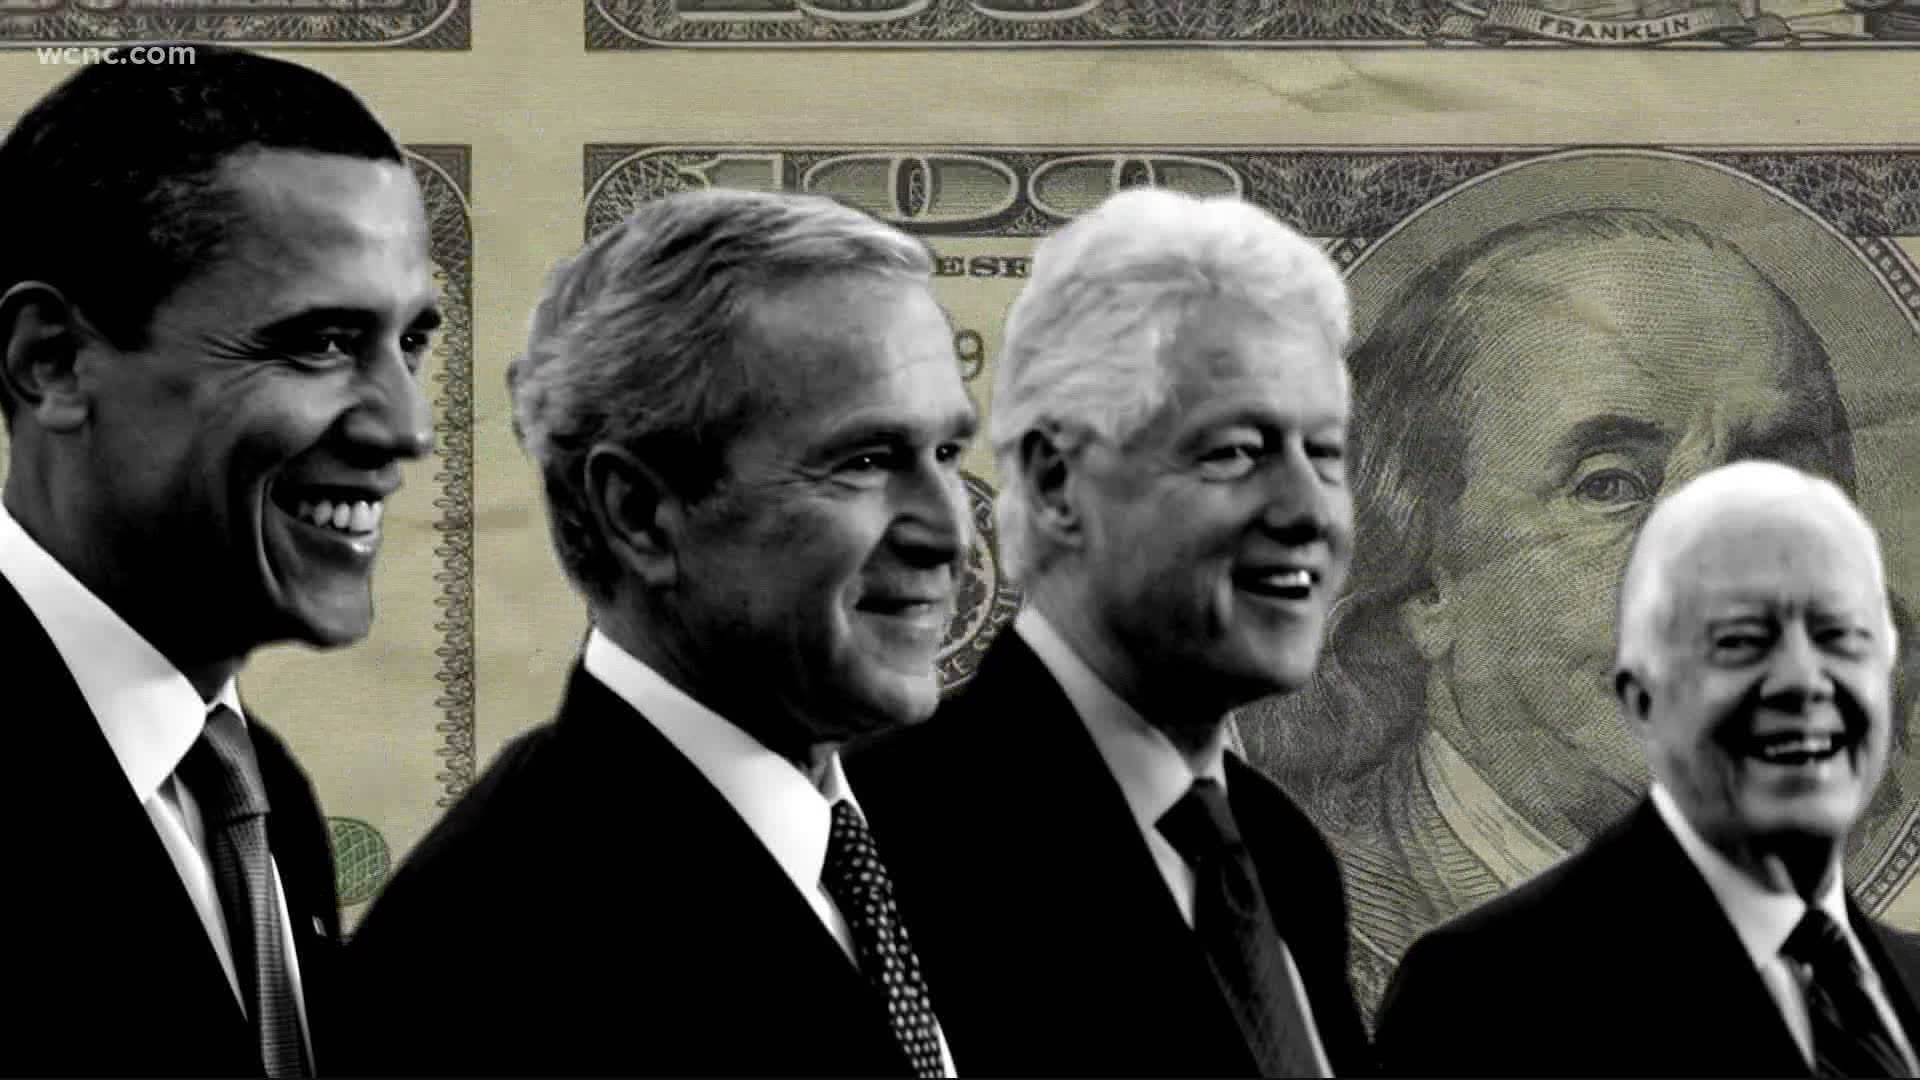 Paper clips, phone bills, and movie channels are just some of the expenses American taxpayers pick up for former presidents.